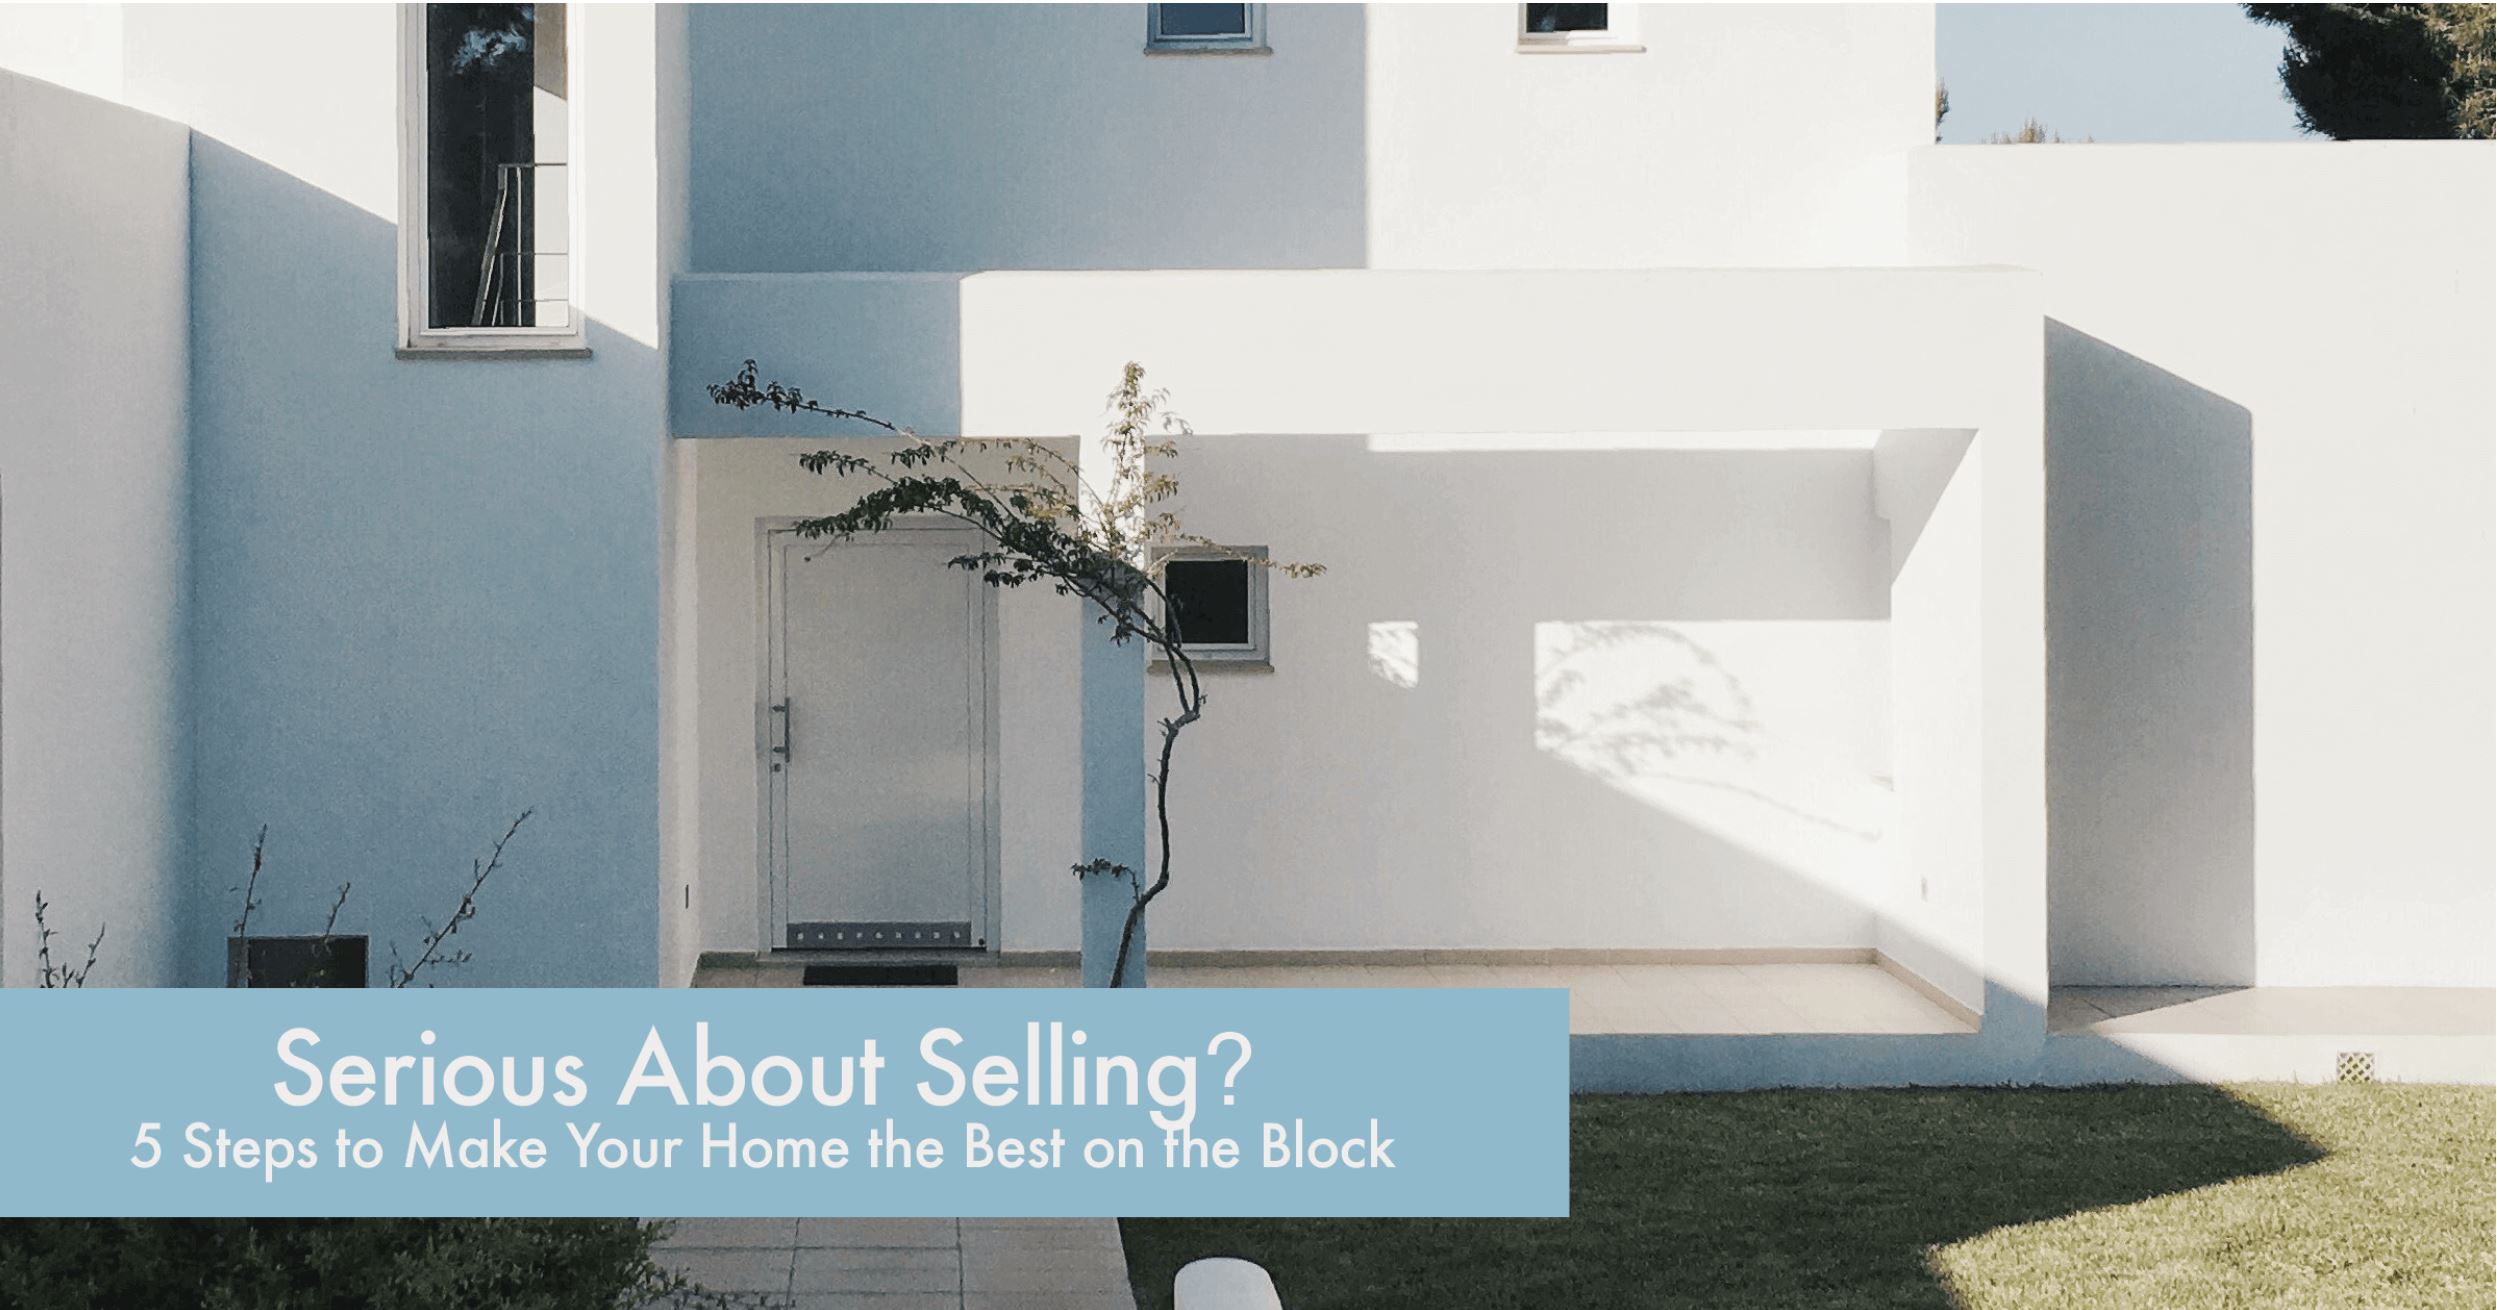 Serious About Selling?